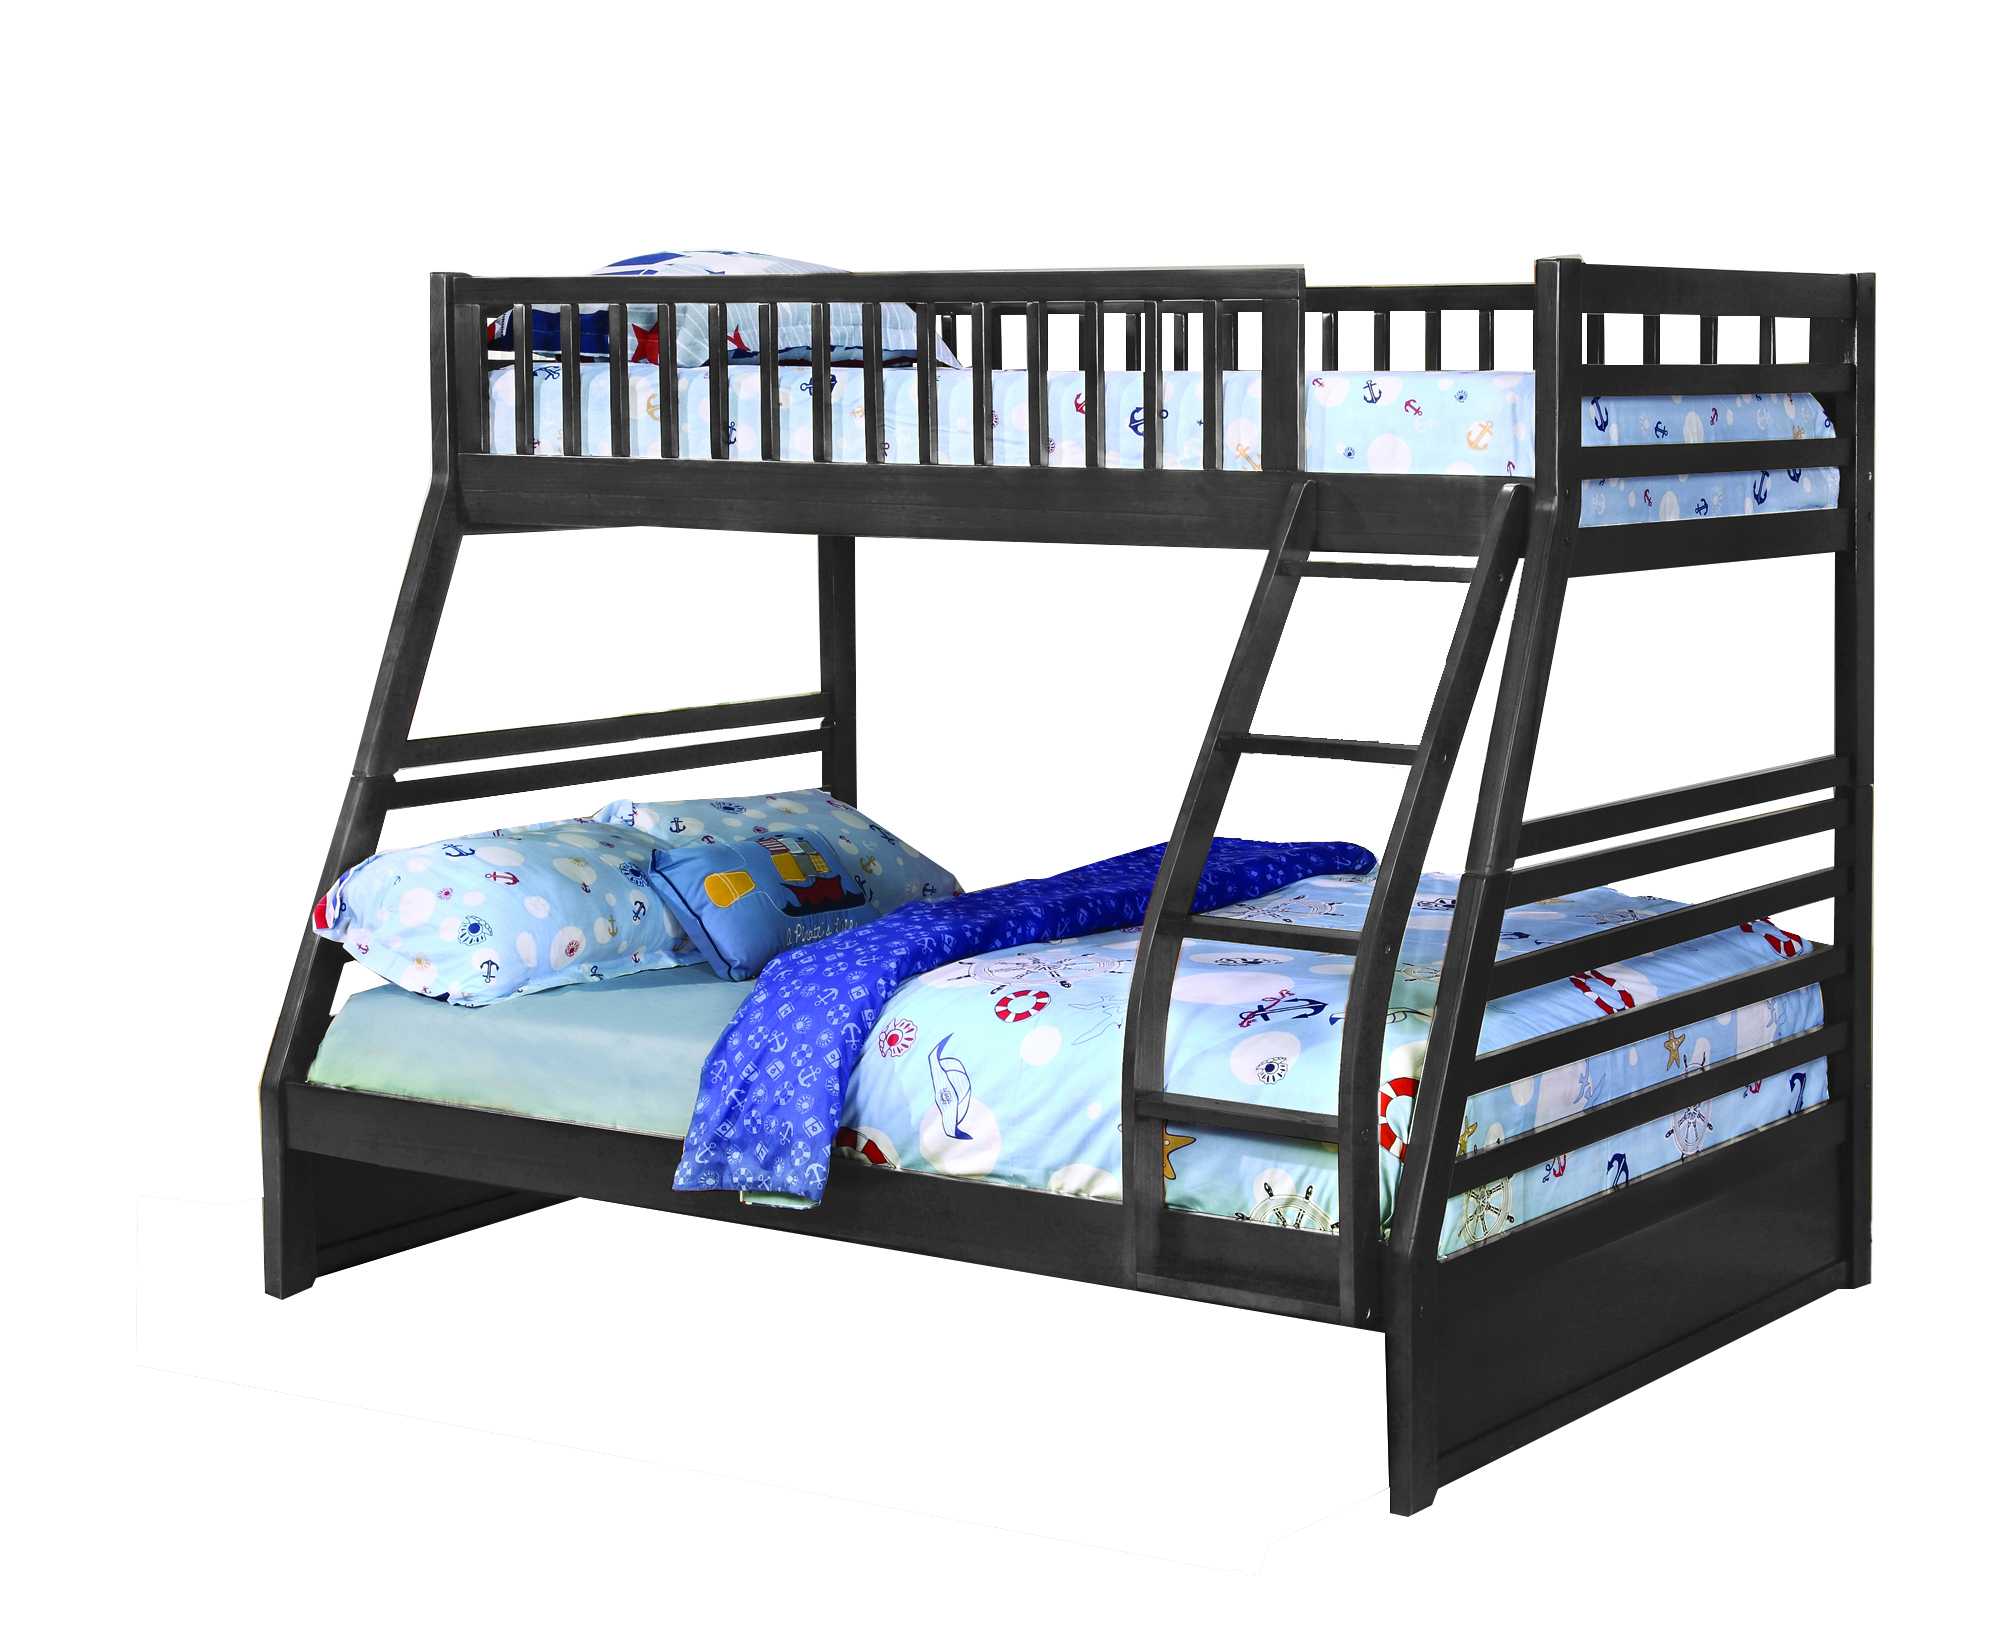 78.75" X 42.5-57.25" X 65" Grey Manufactured Wood and Solid Wood Twin or Full Bunk Bed